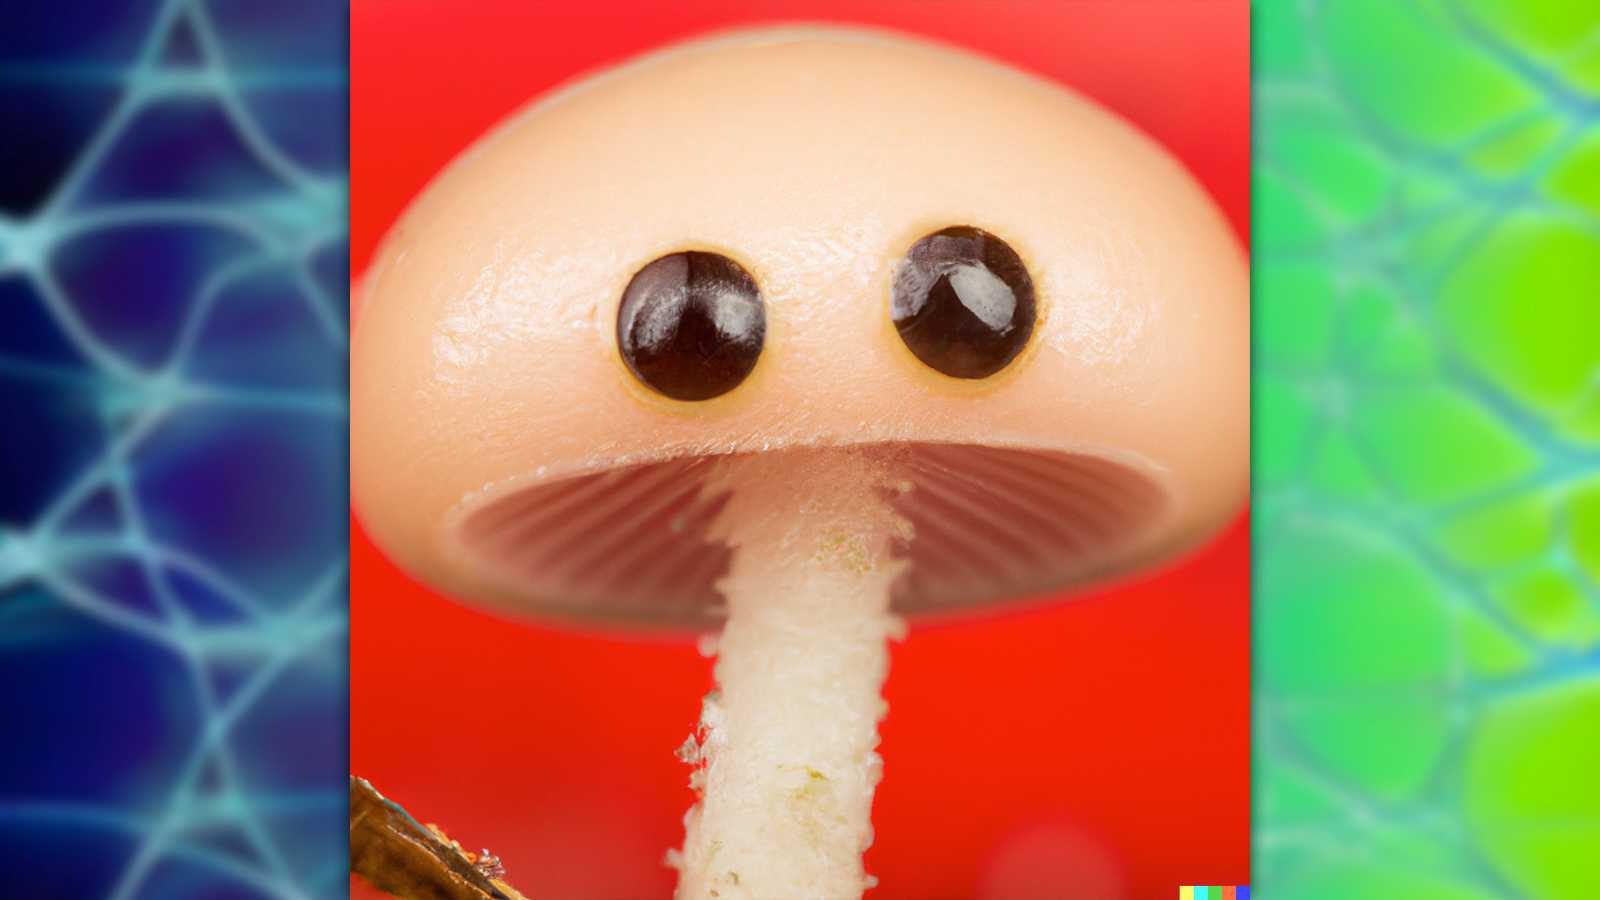 A mushroom with eyes by DALLE